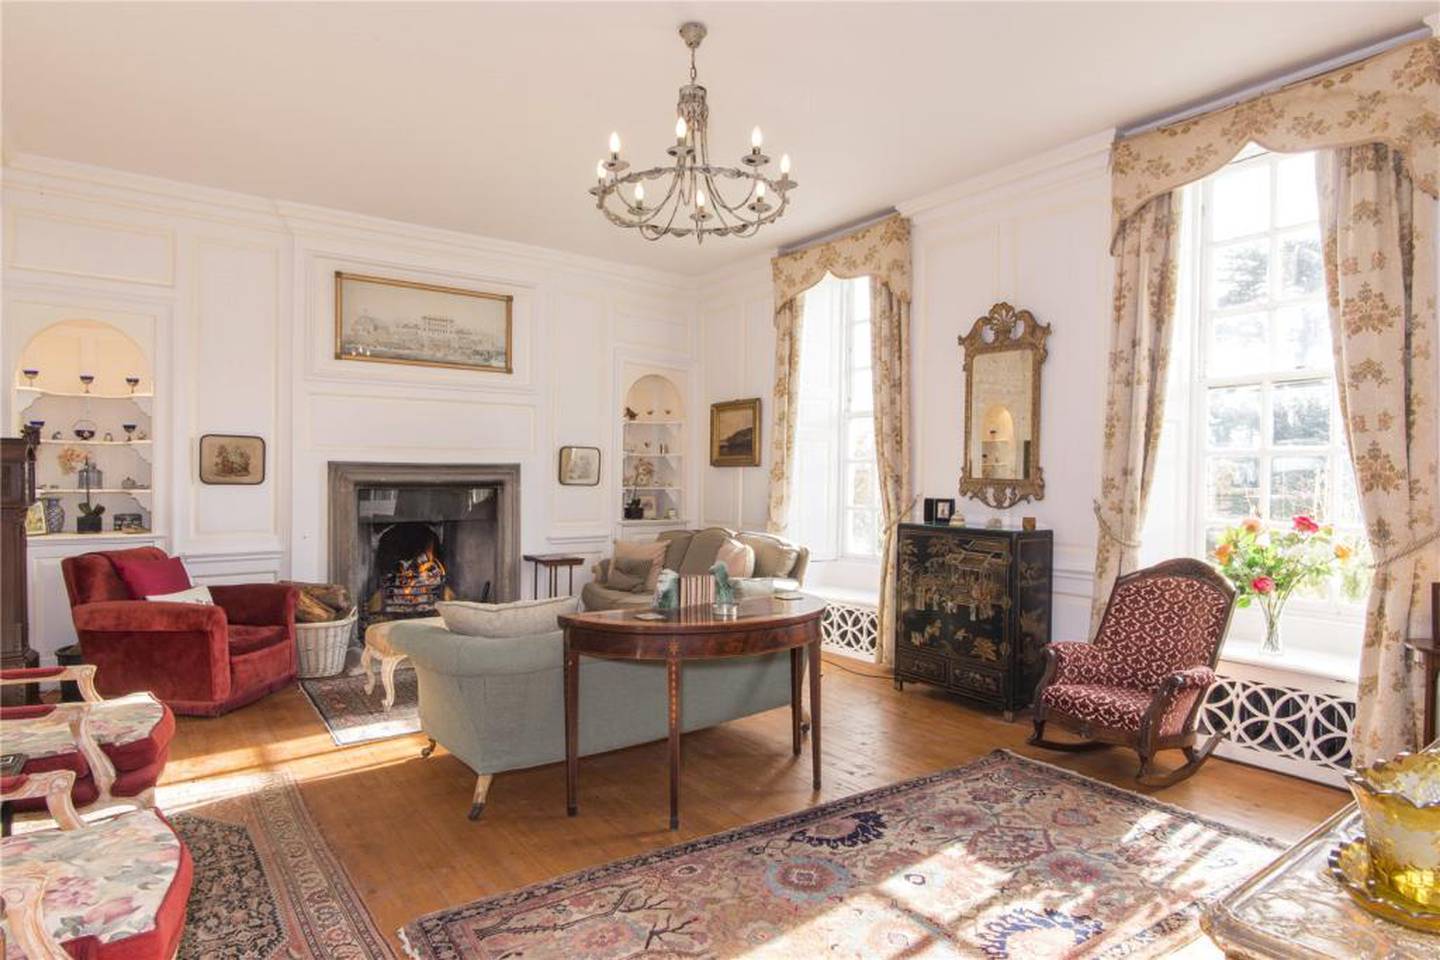 The drawing room at Luckington Court. Photo: Woolley & Wallis